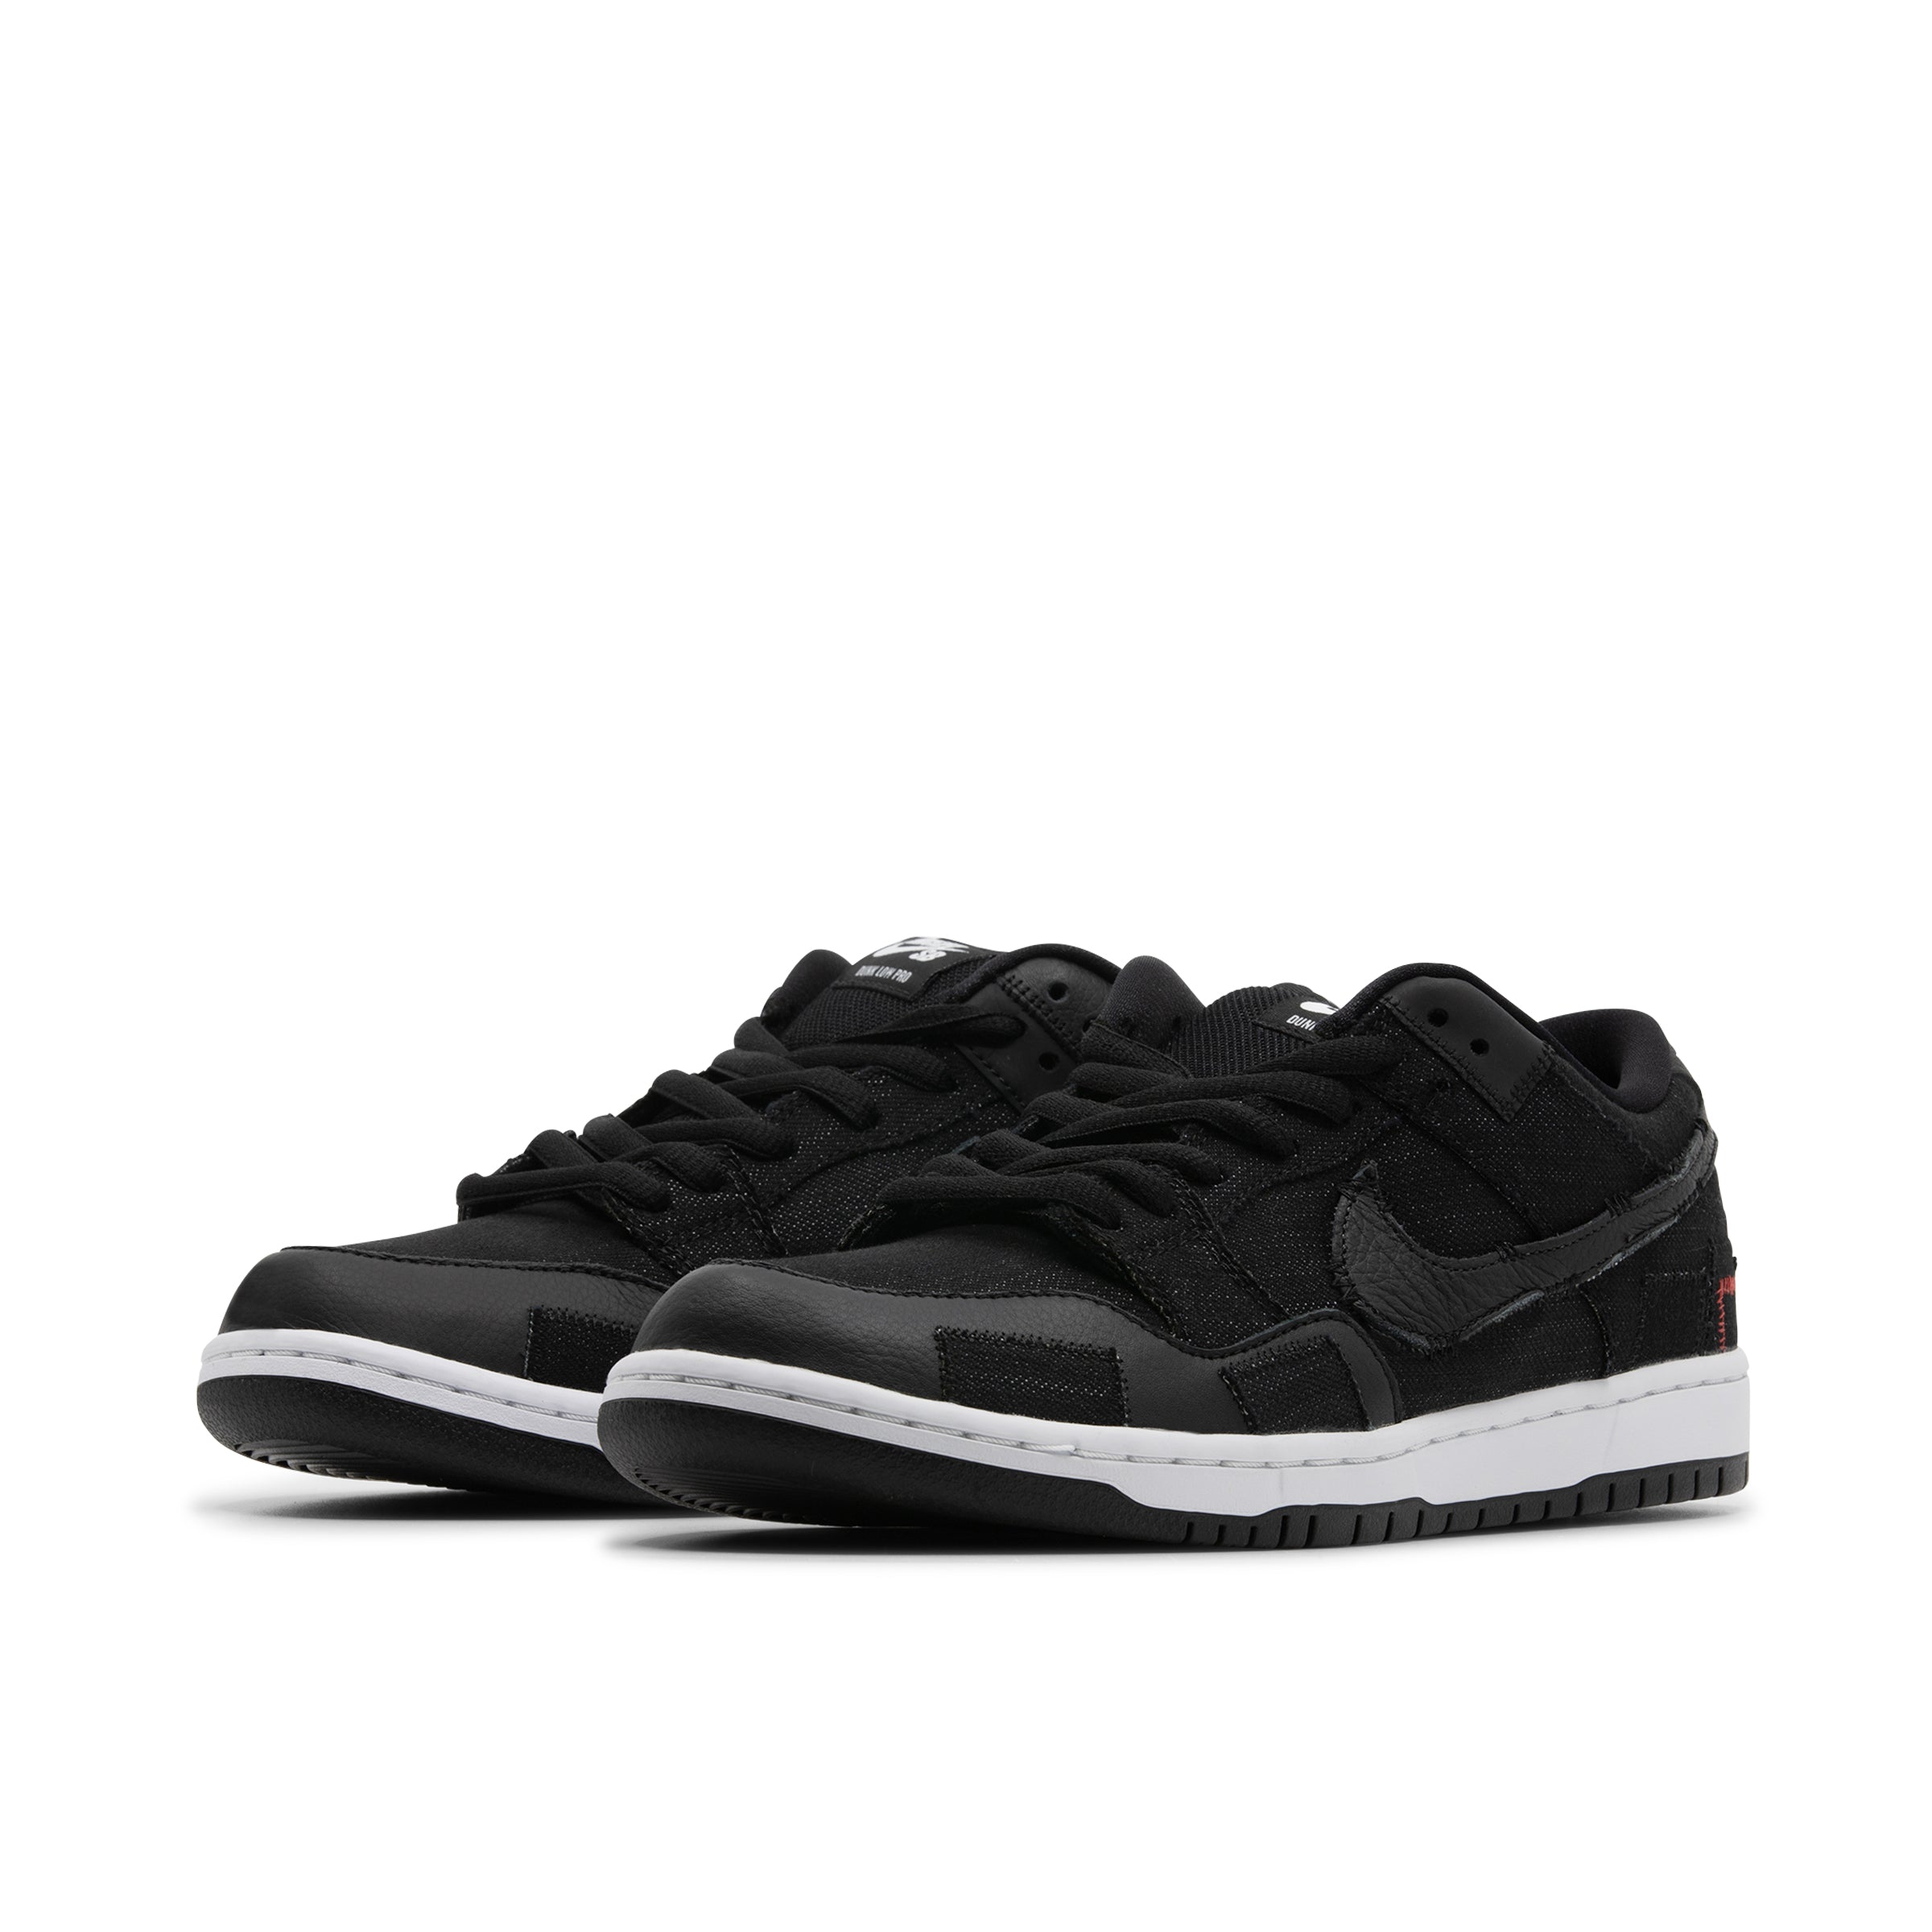 NIKE SB DUNK LOW WASTED YOUTH (SPECIAL BOX)